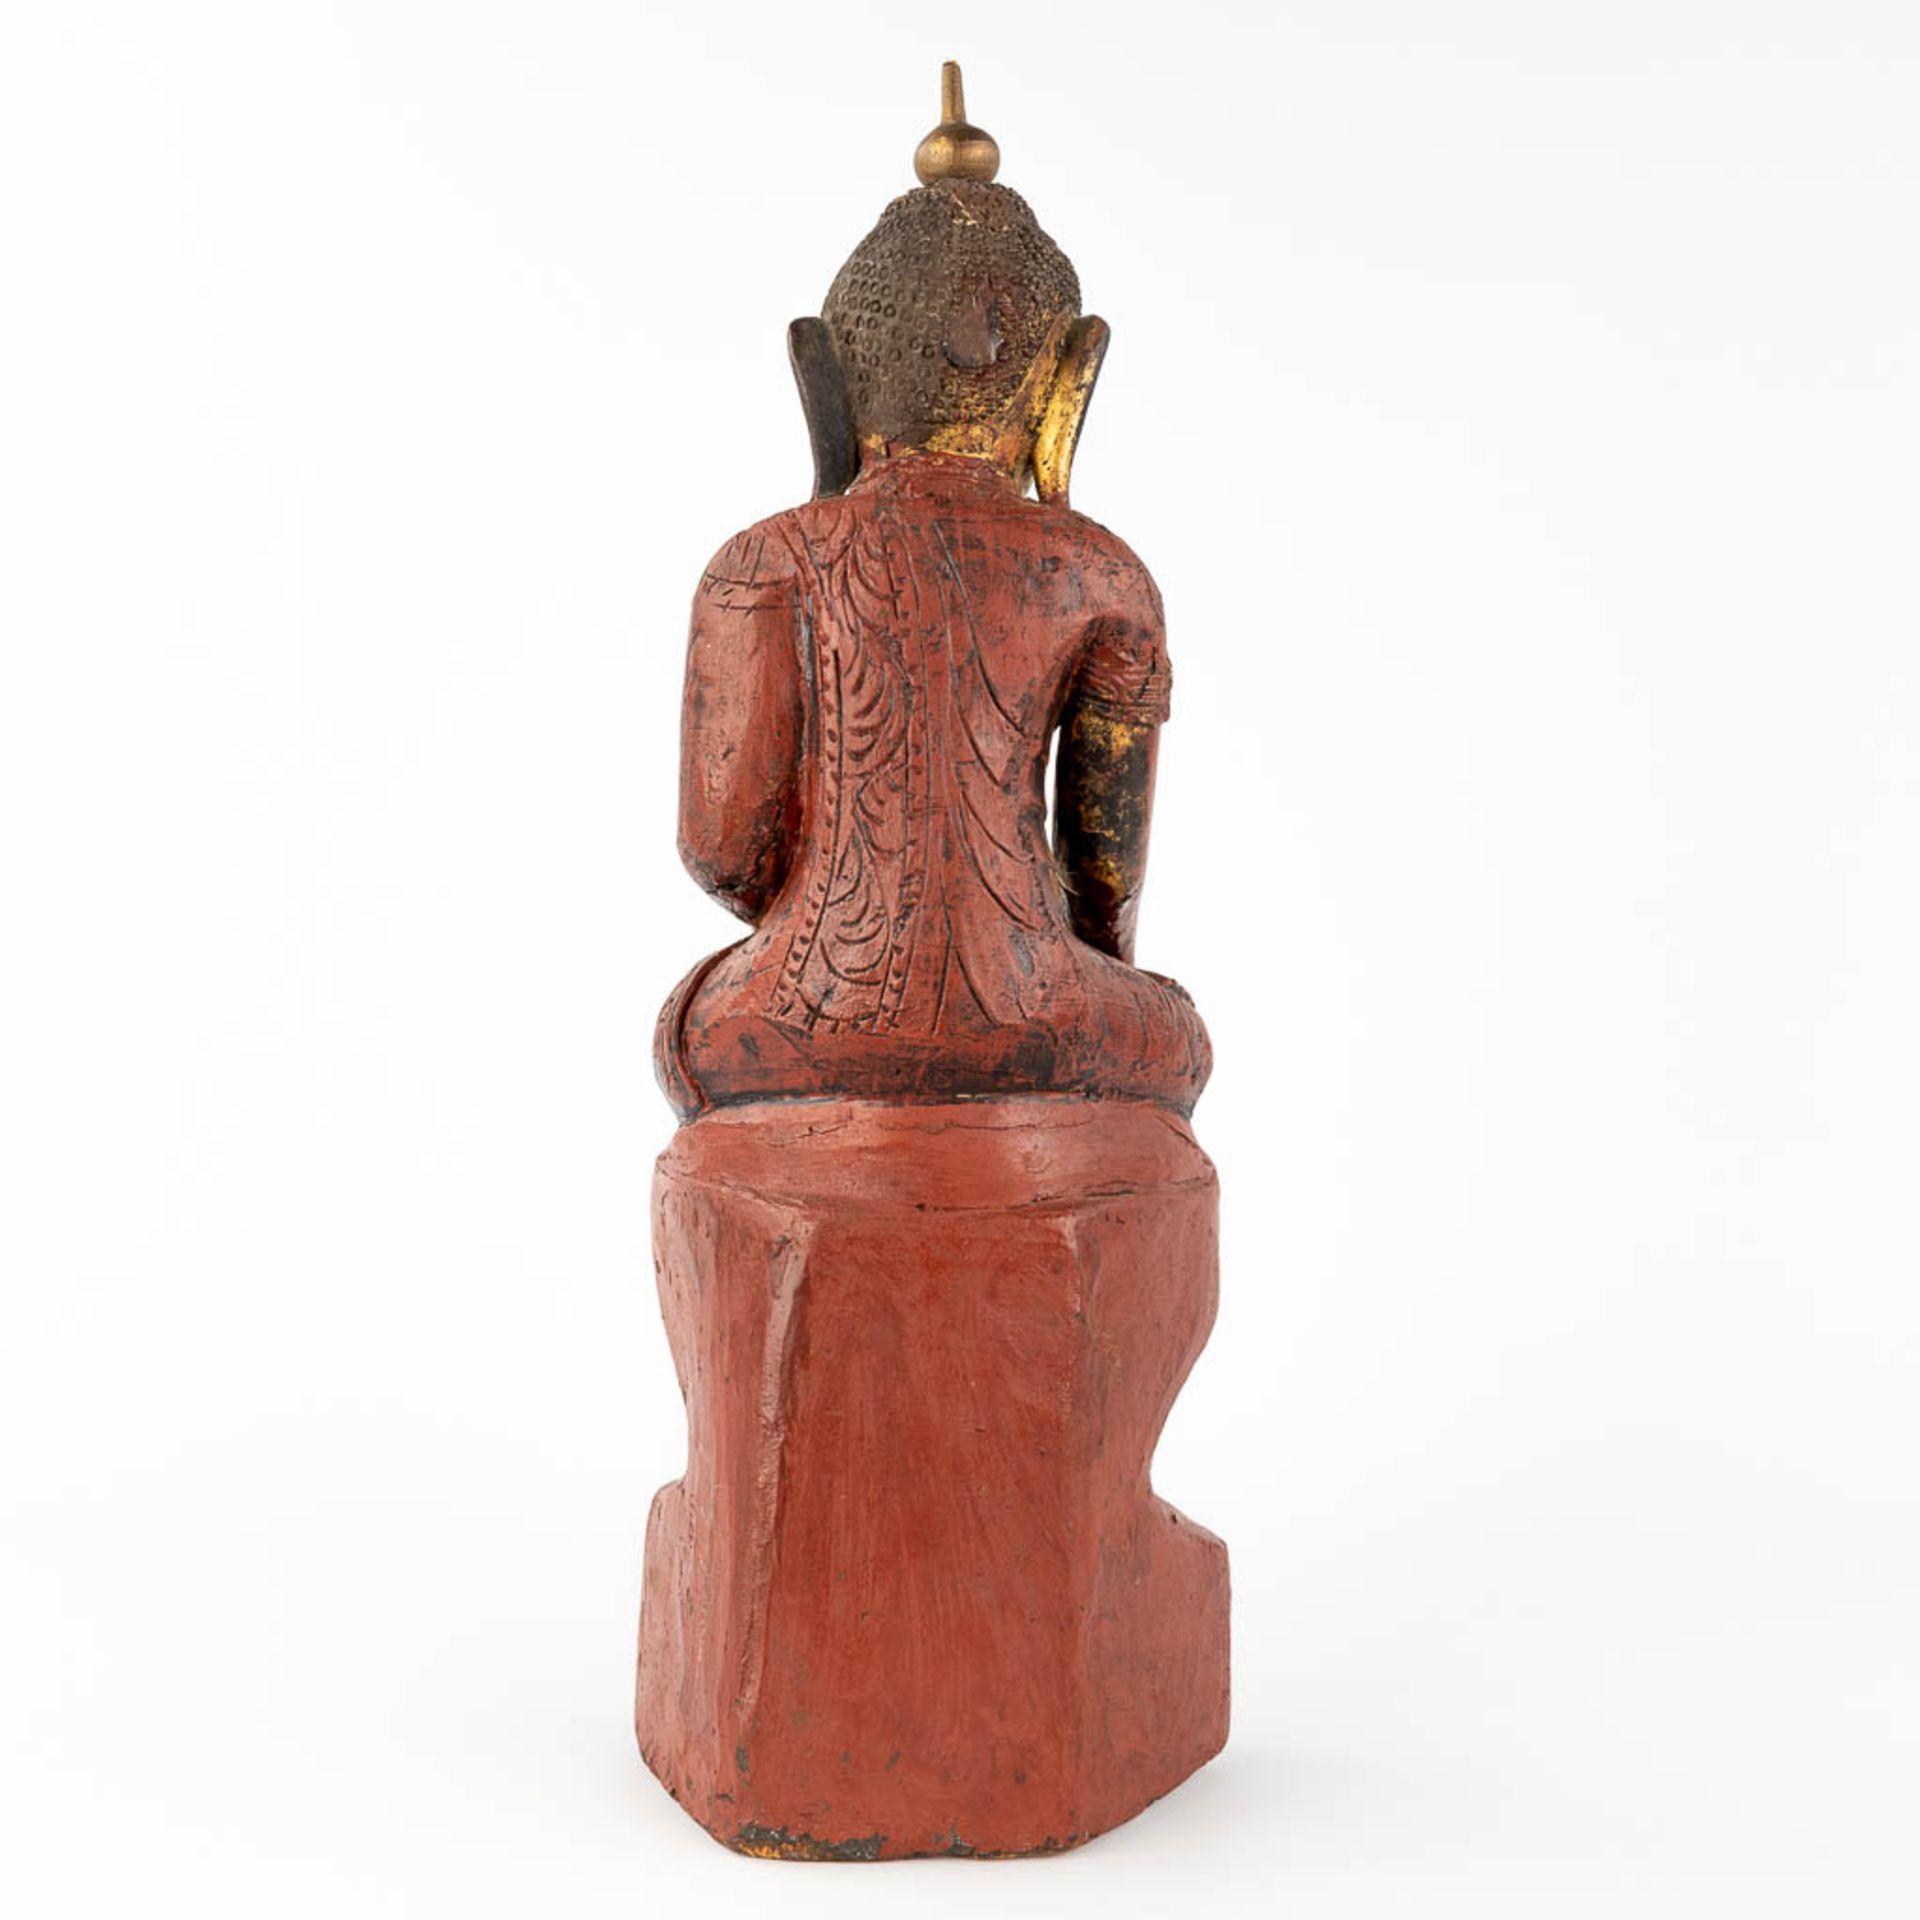 A collection of two wood-sculptured buddha statues, 19th/20th C. (W: 29 x H: 60 cm) - Image 17 of 27